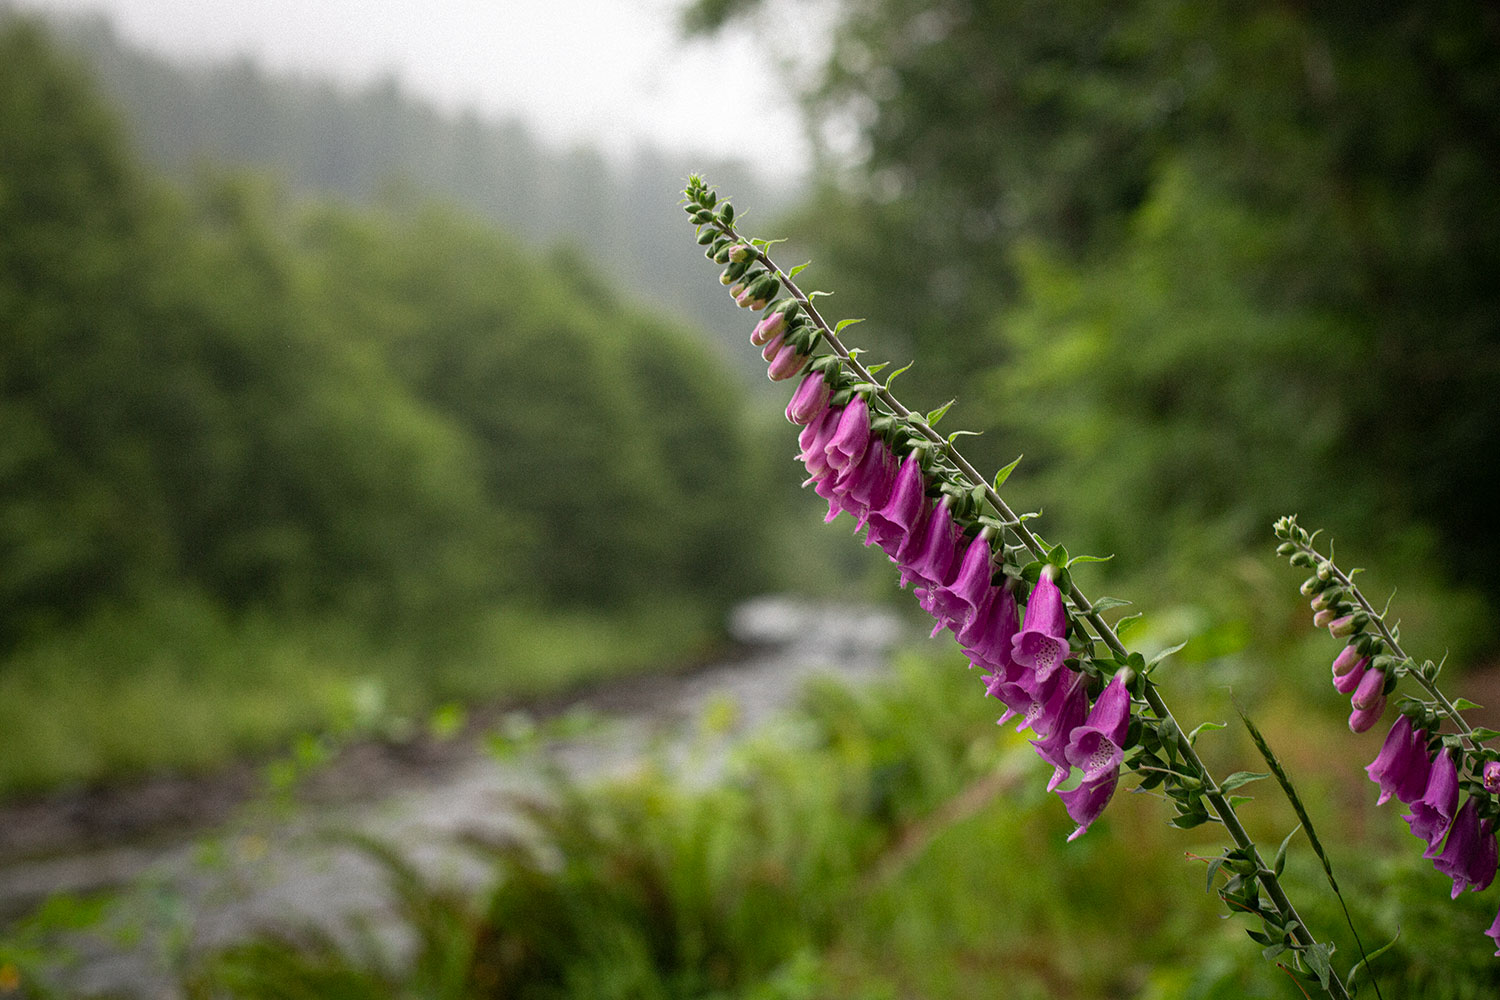 An image of magenta fox gloves in focus, against an out-of-focus background of river, summer-green trees and ferns.